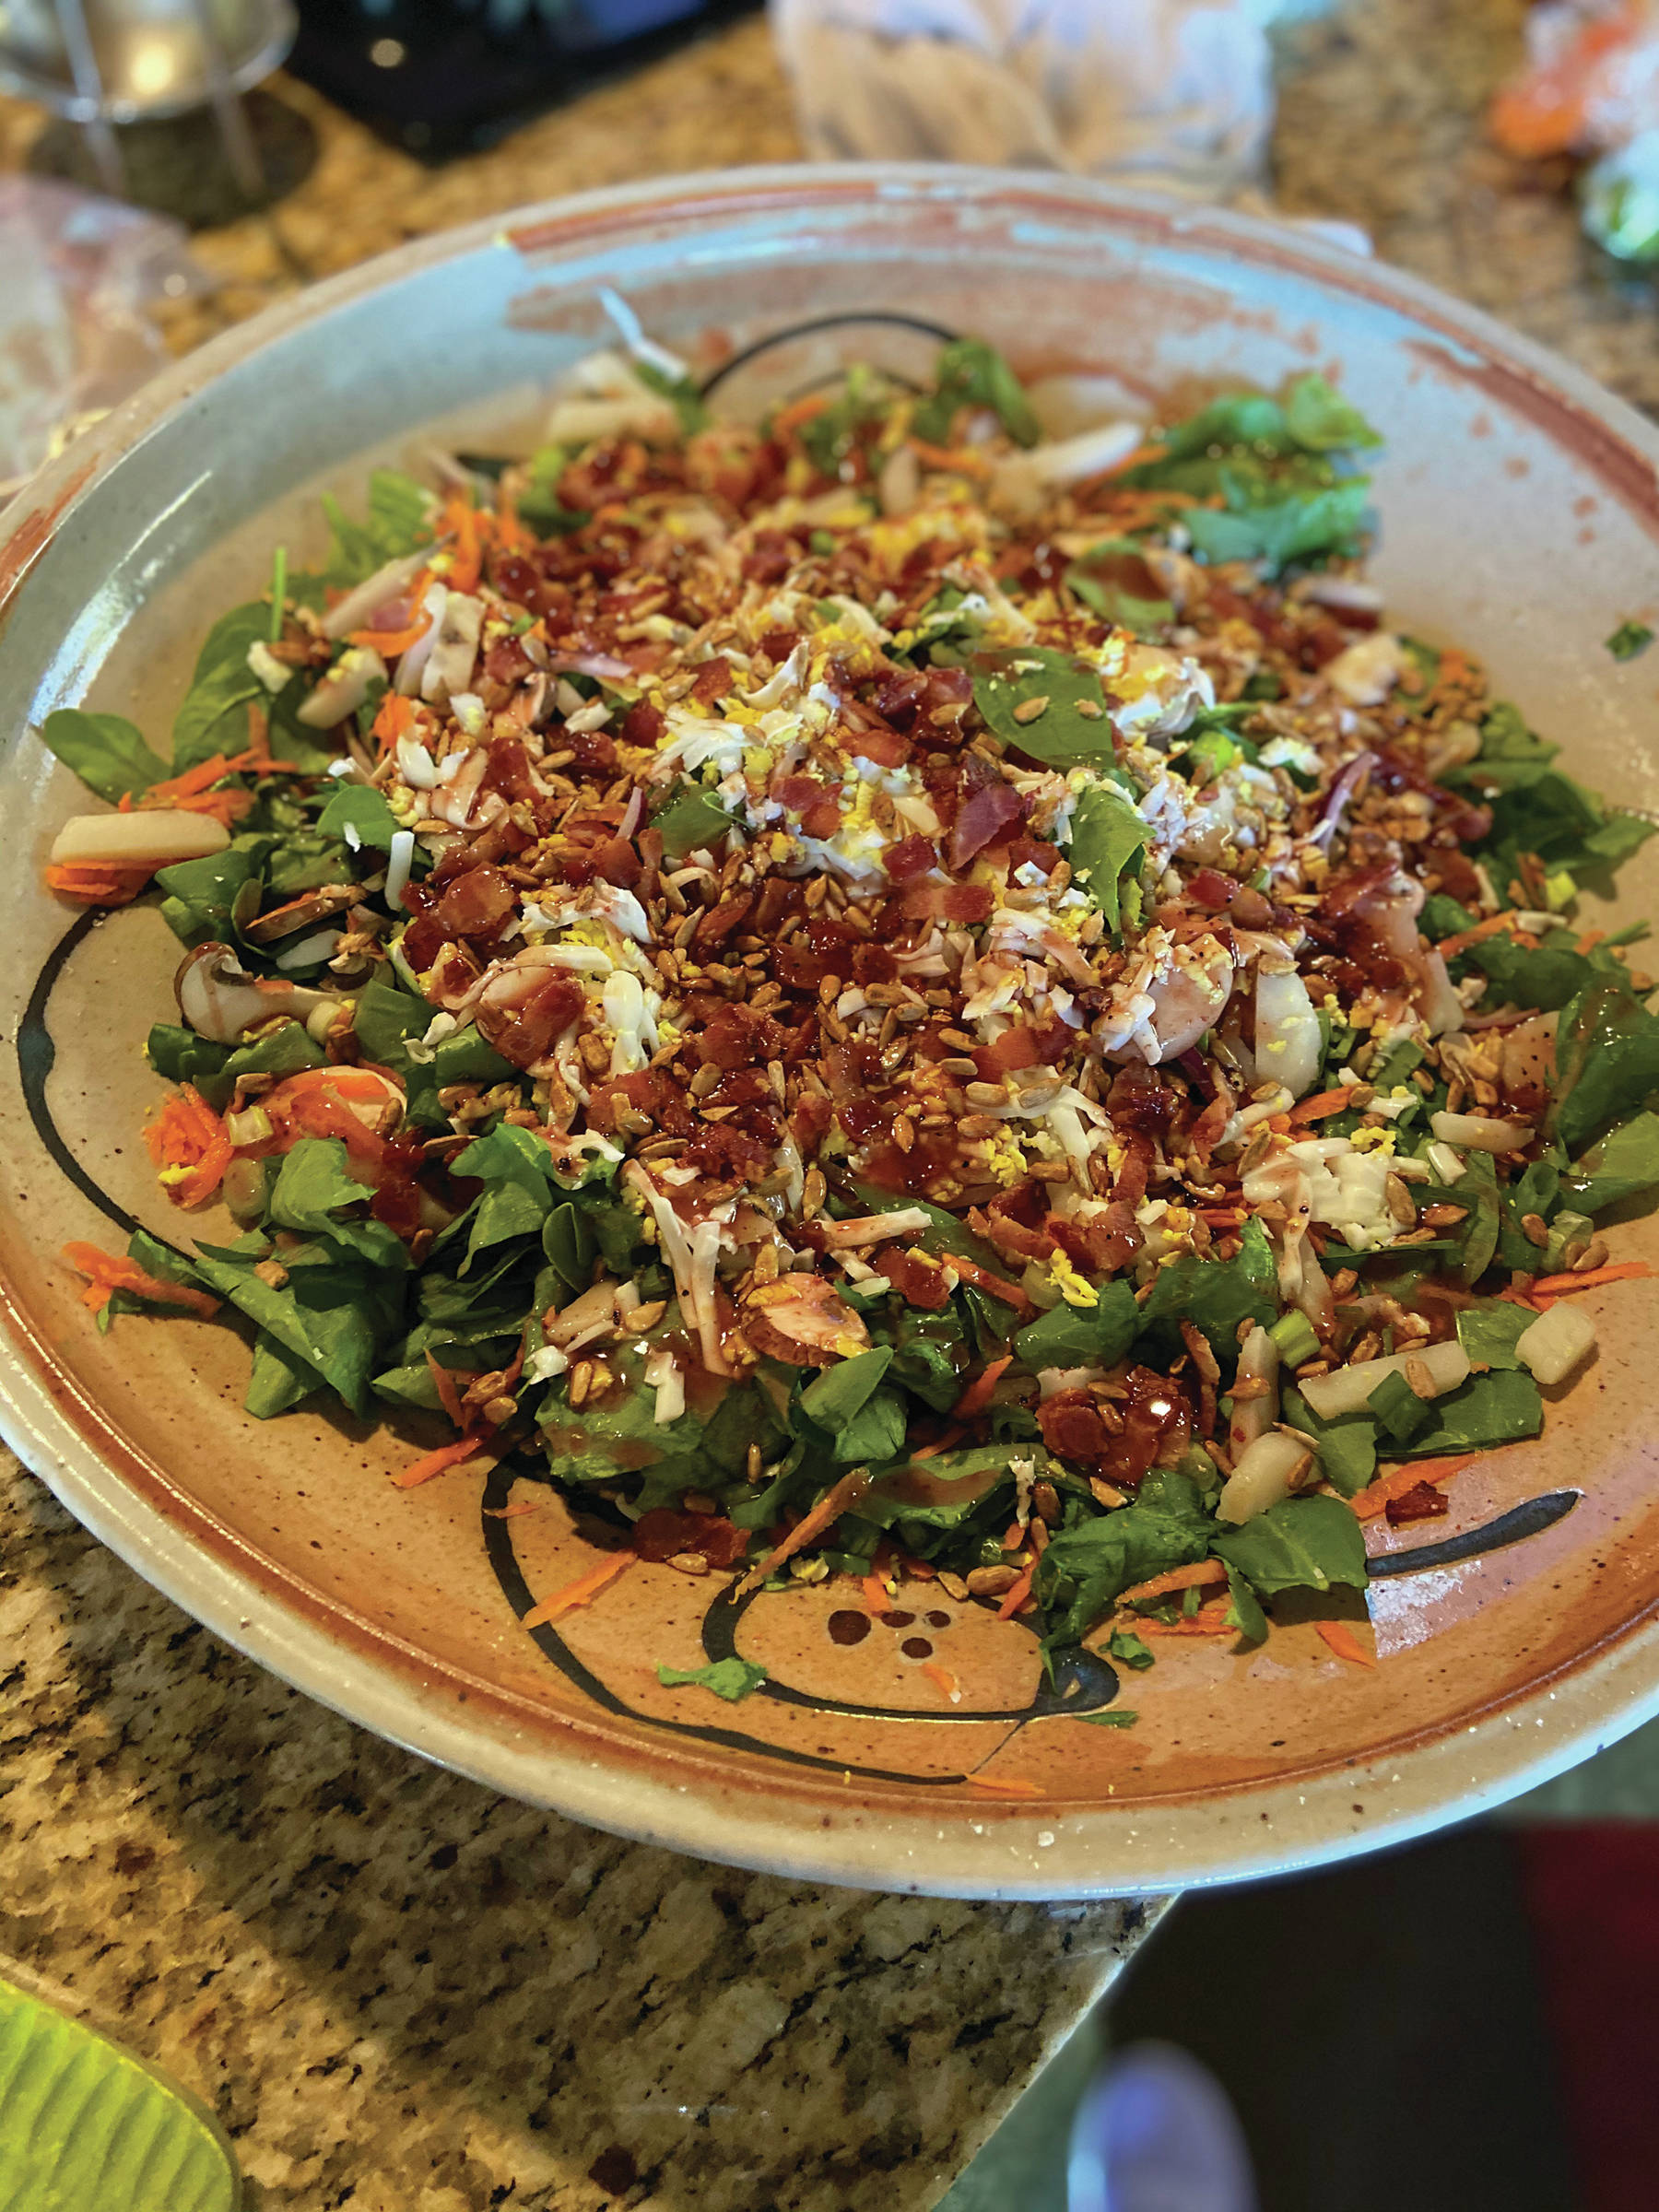 Teri’s Special Spinach Salad with Hot Bacon and Red Wine Vinaigrette features a tasty bacon dressing over spinach, eggs, chopped chestnuts and other ingredients. She made her recipe on May 17, 2020, at her kitchen in Homer, Alaska. (Photo by Teri Robl)